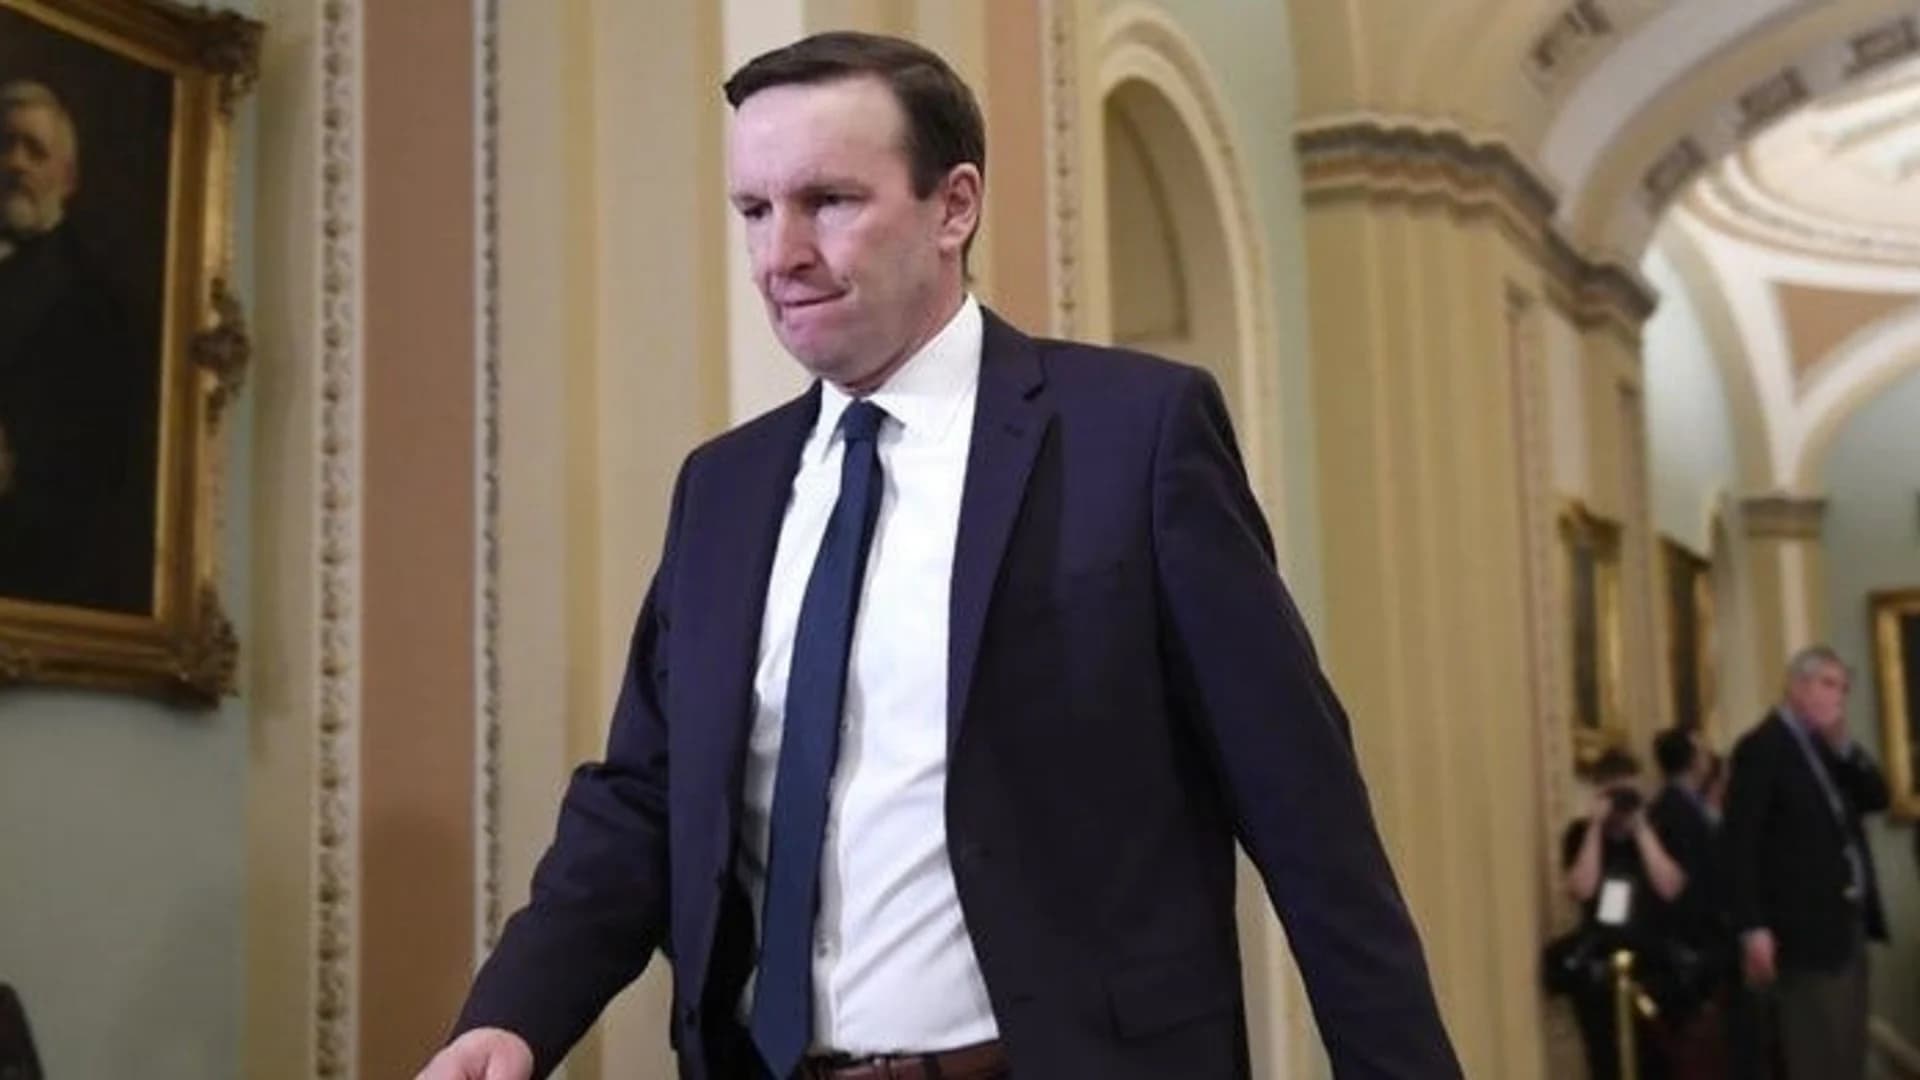 Sen. Murphy defends meeting with Iran foreign minister in Munich